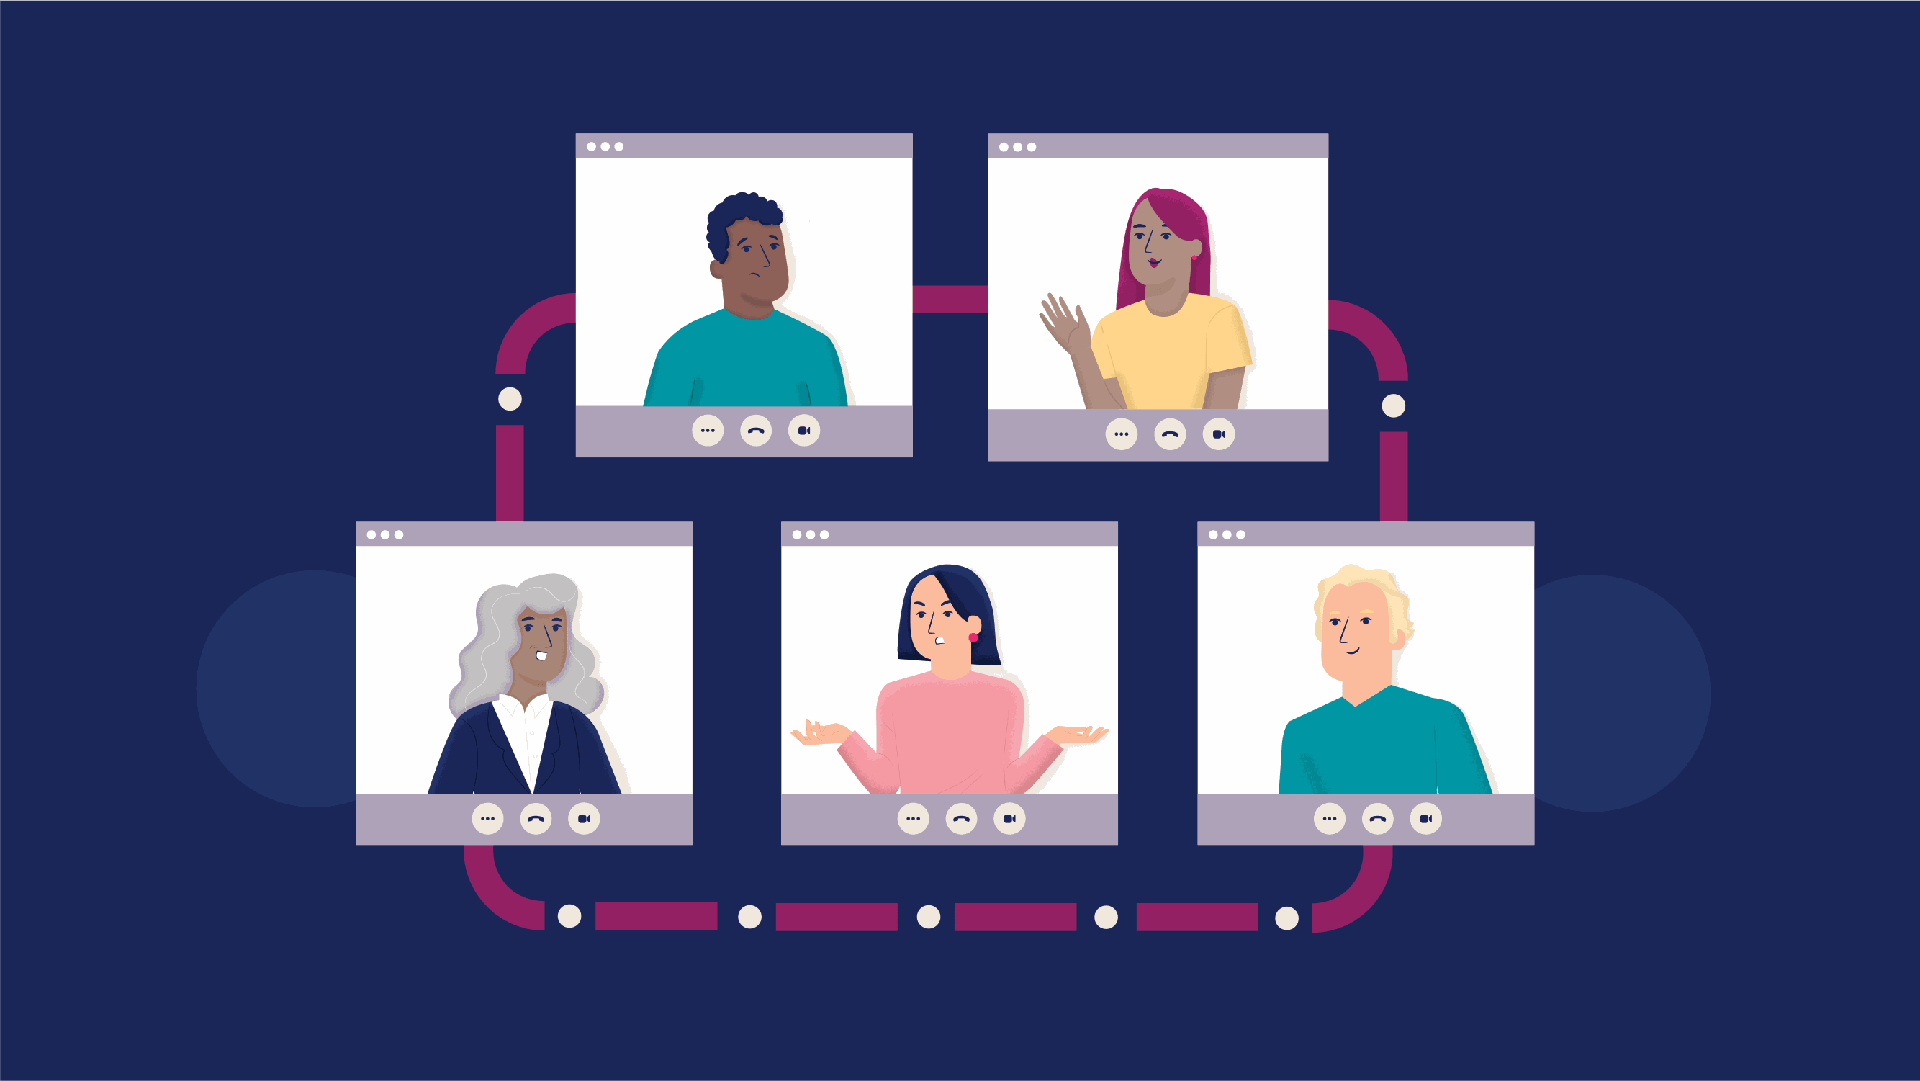 How to connect with anyone who calls your business: illustration of 5 people with different expressions in computer screens